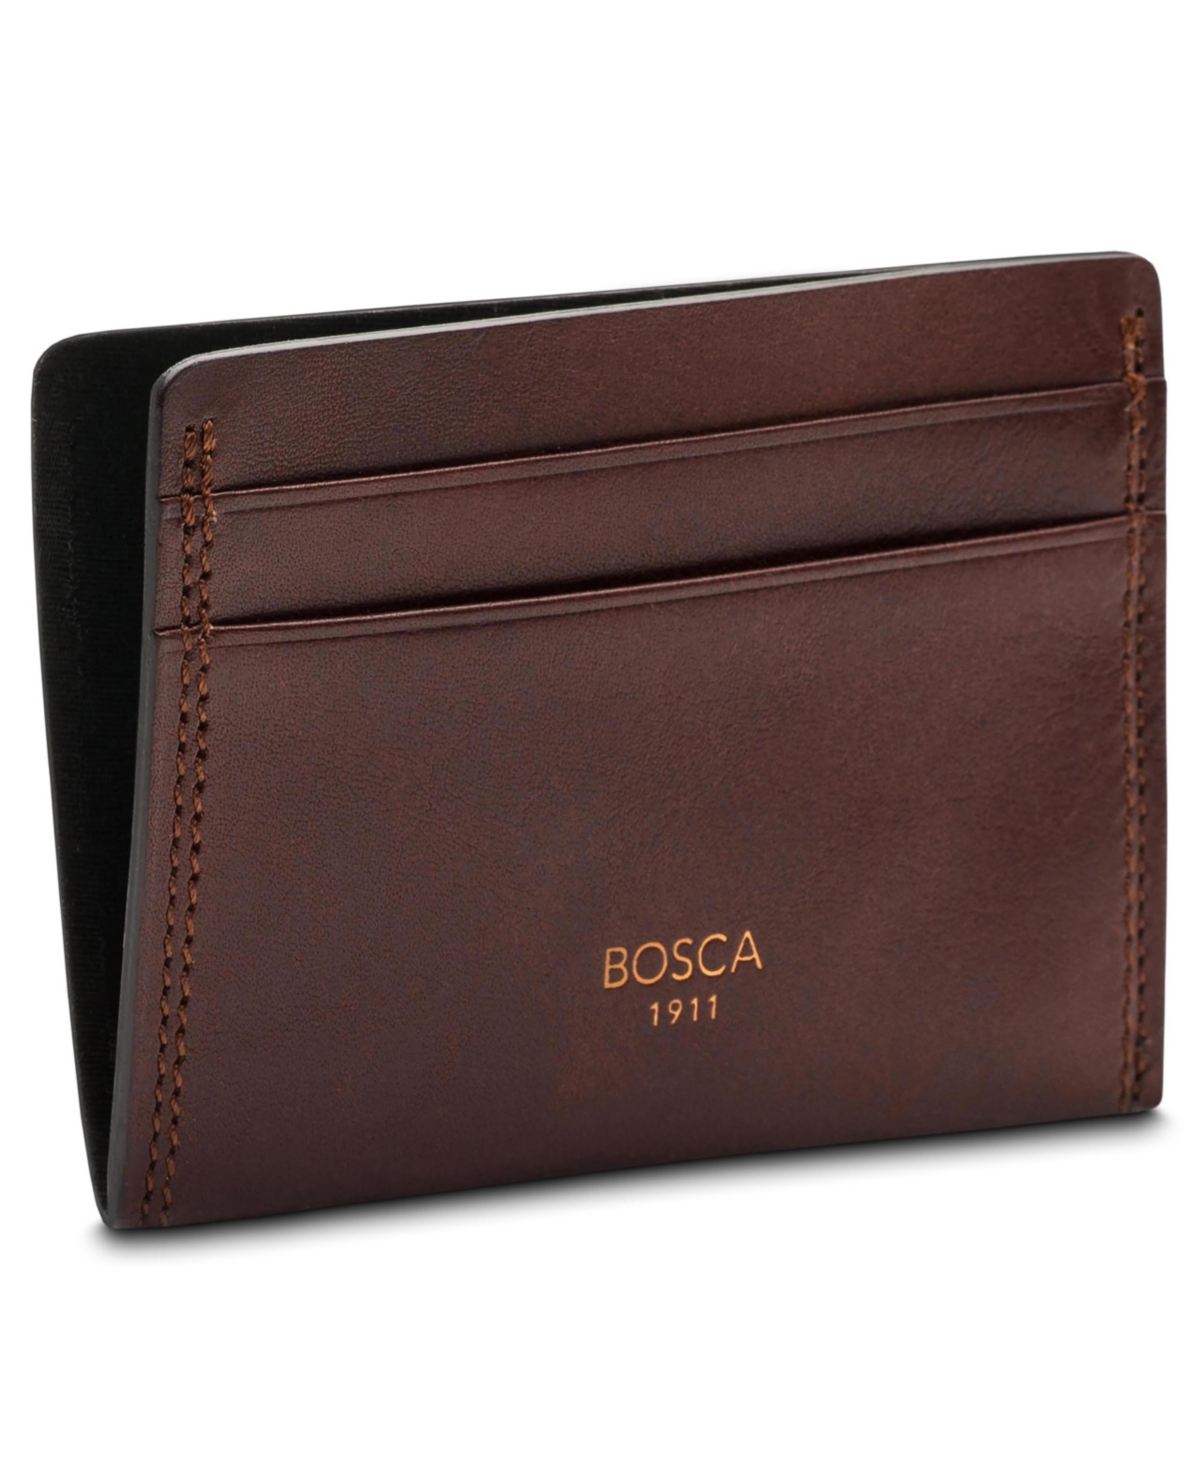 Mens Dolce Collection - Weekend Wallet - Dark brown